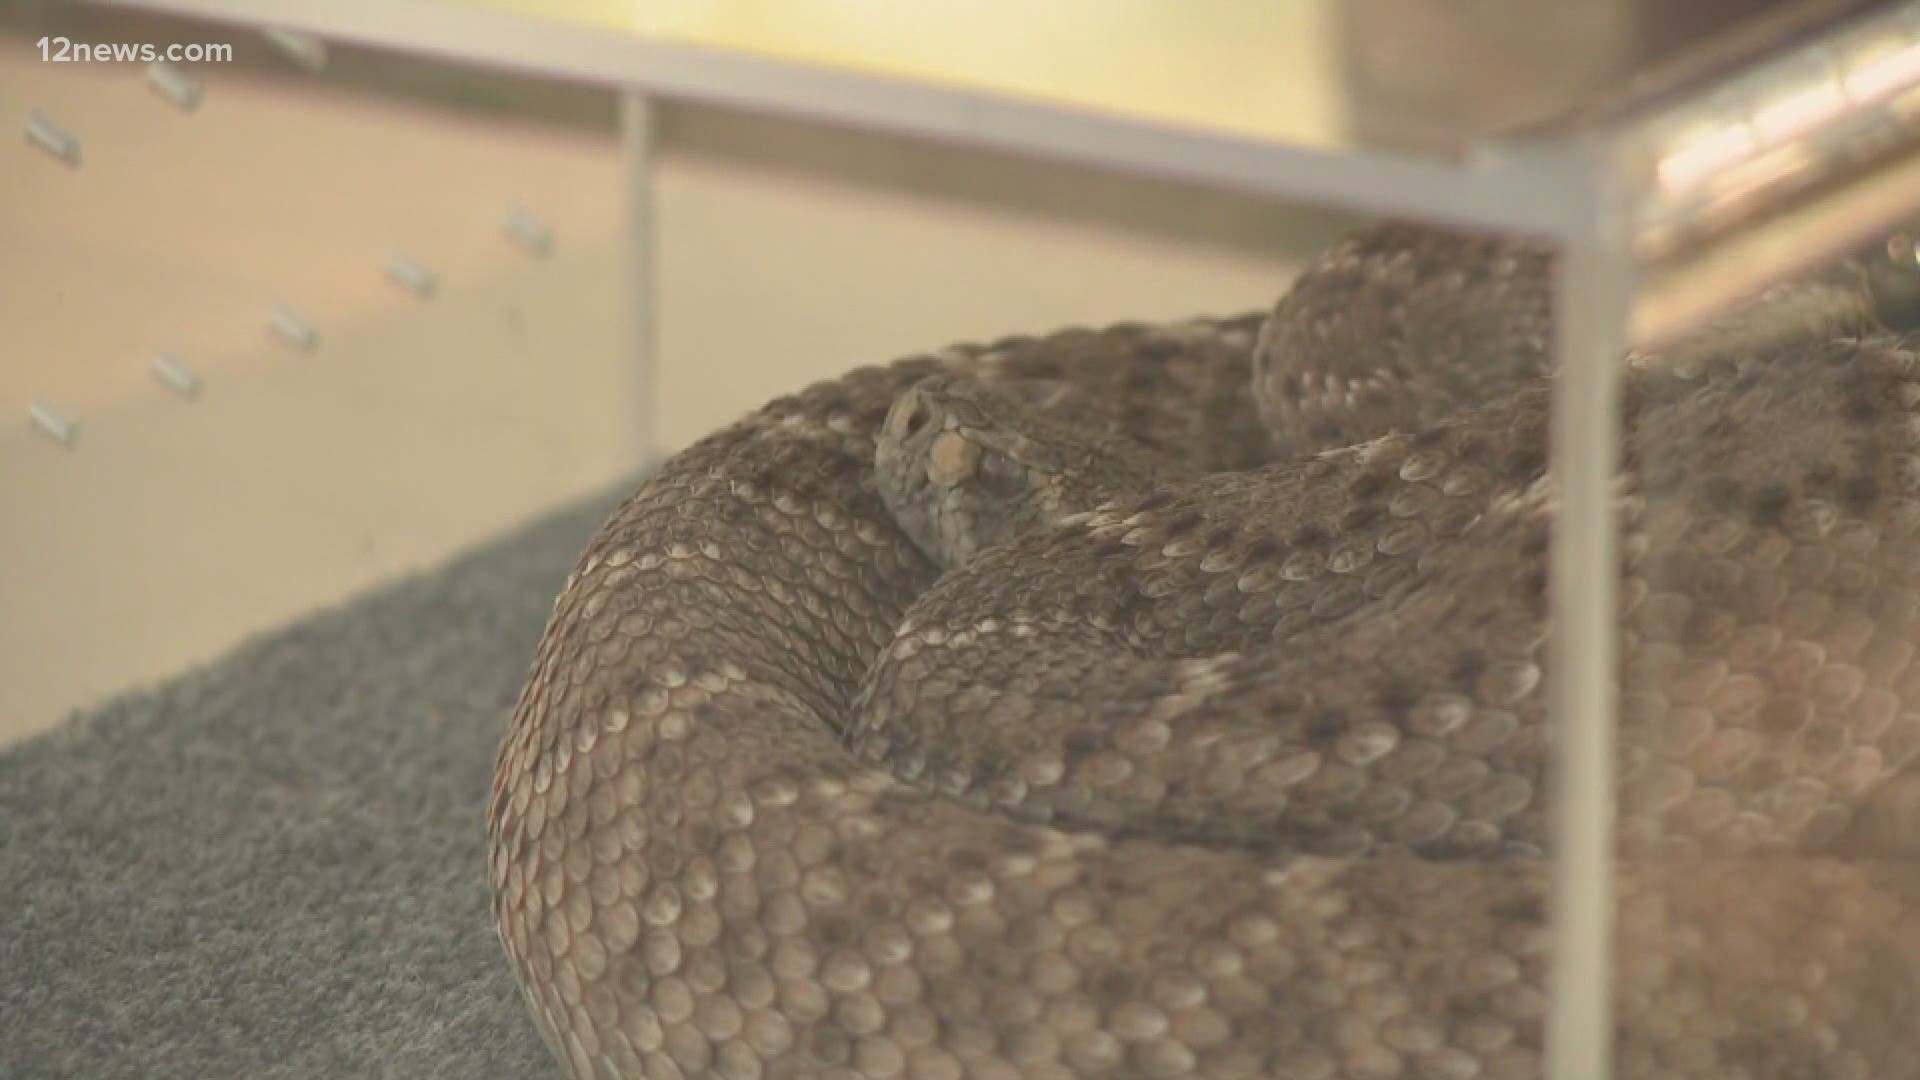 Rattlesnakes are coming out of hibernation and heading for your hiking trail, golf course or even your home. Team 12's Matt Yurus has the latest.